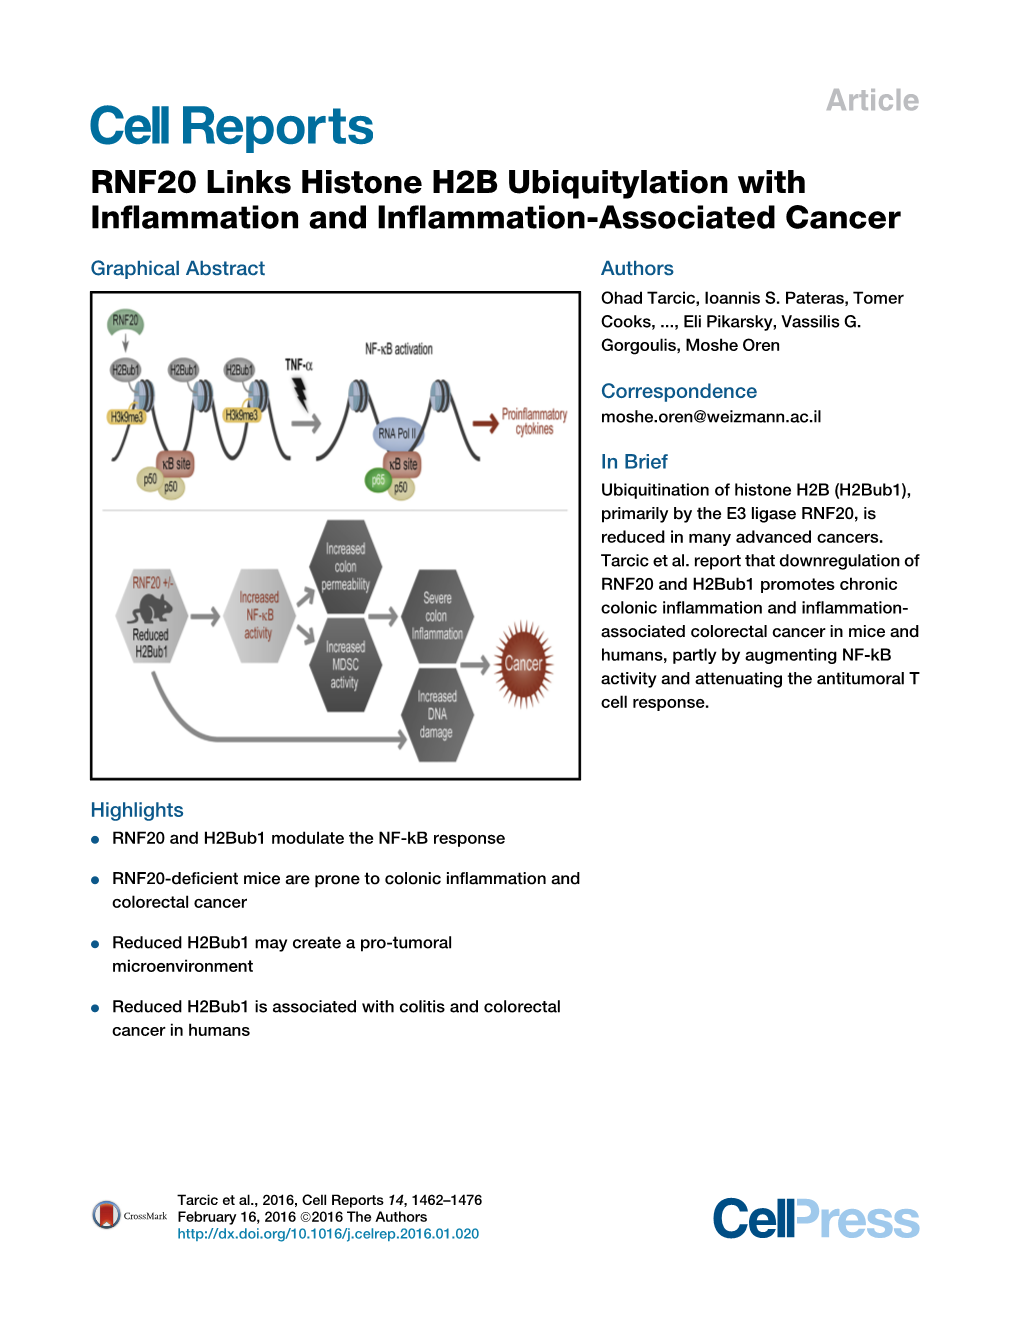 RNF20 Links Histone H2B Ubiquitylation with Inflammation